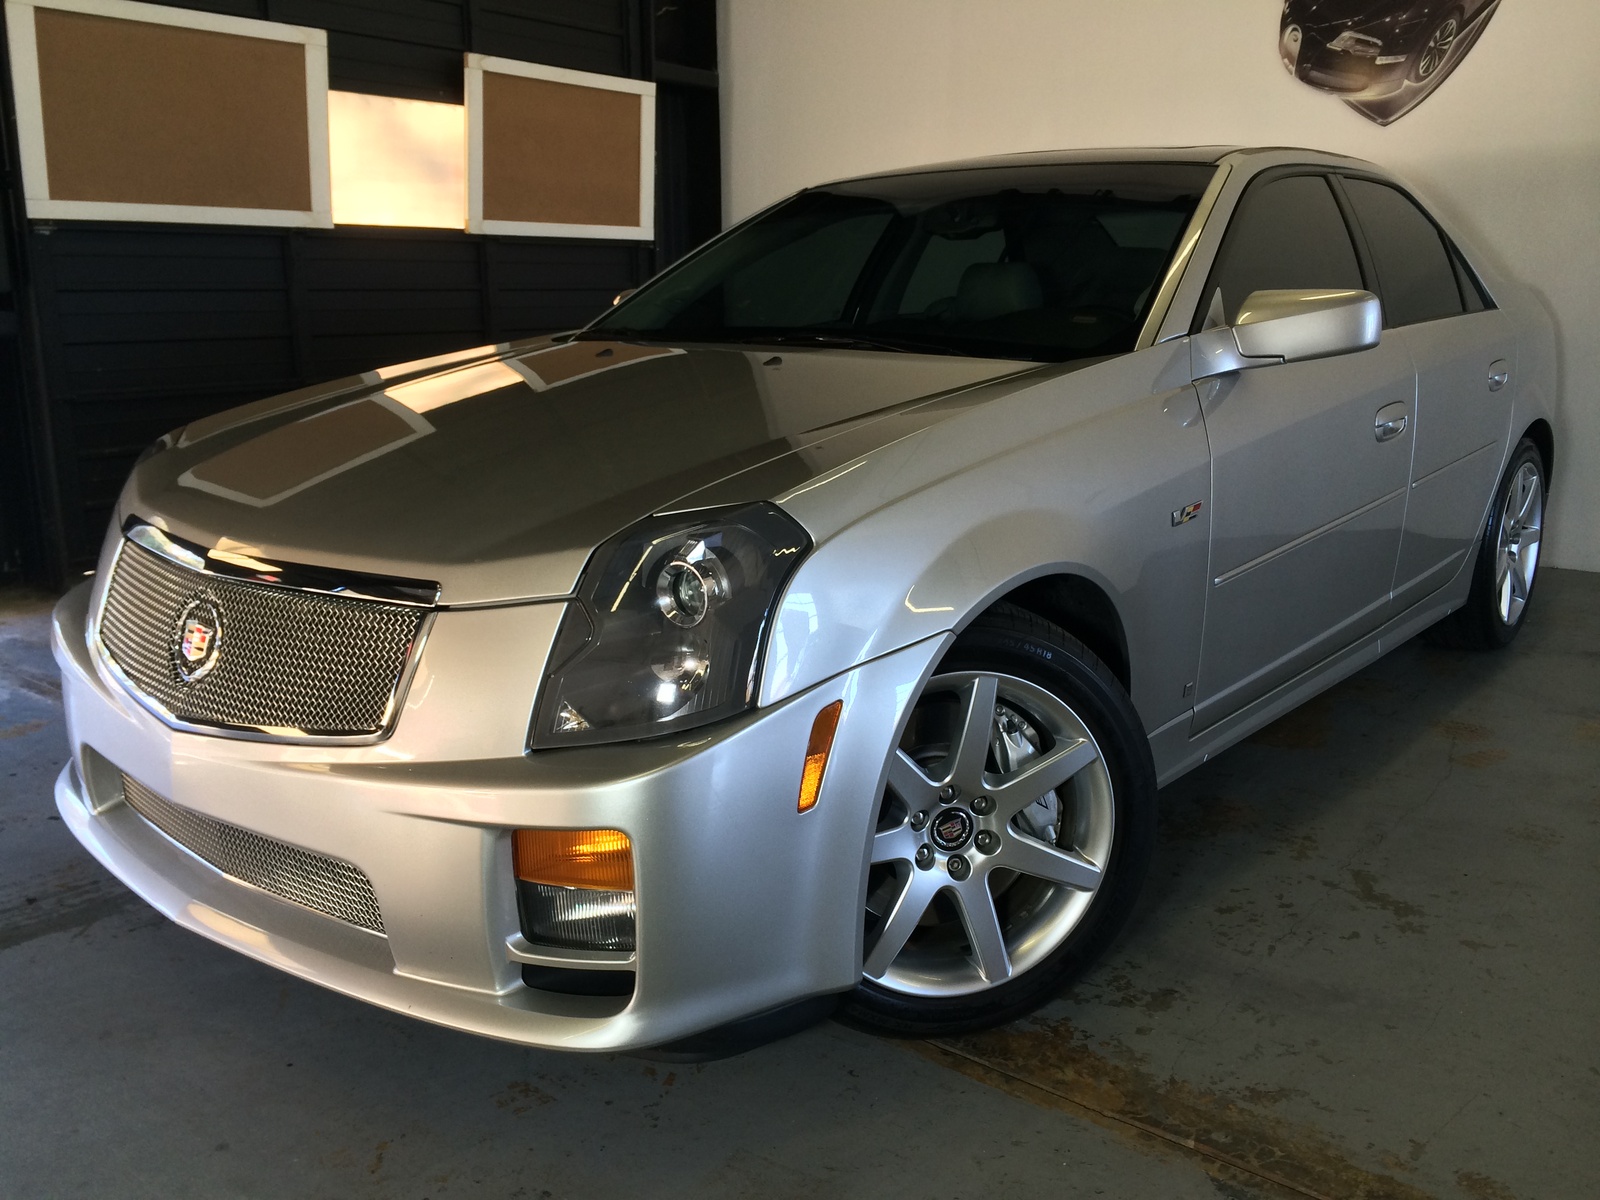 2007 Cadillac CTS-V - Exterior Pictures - CarGurus